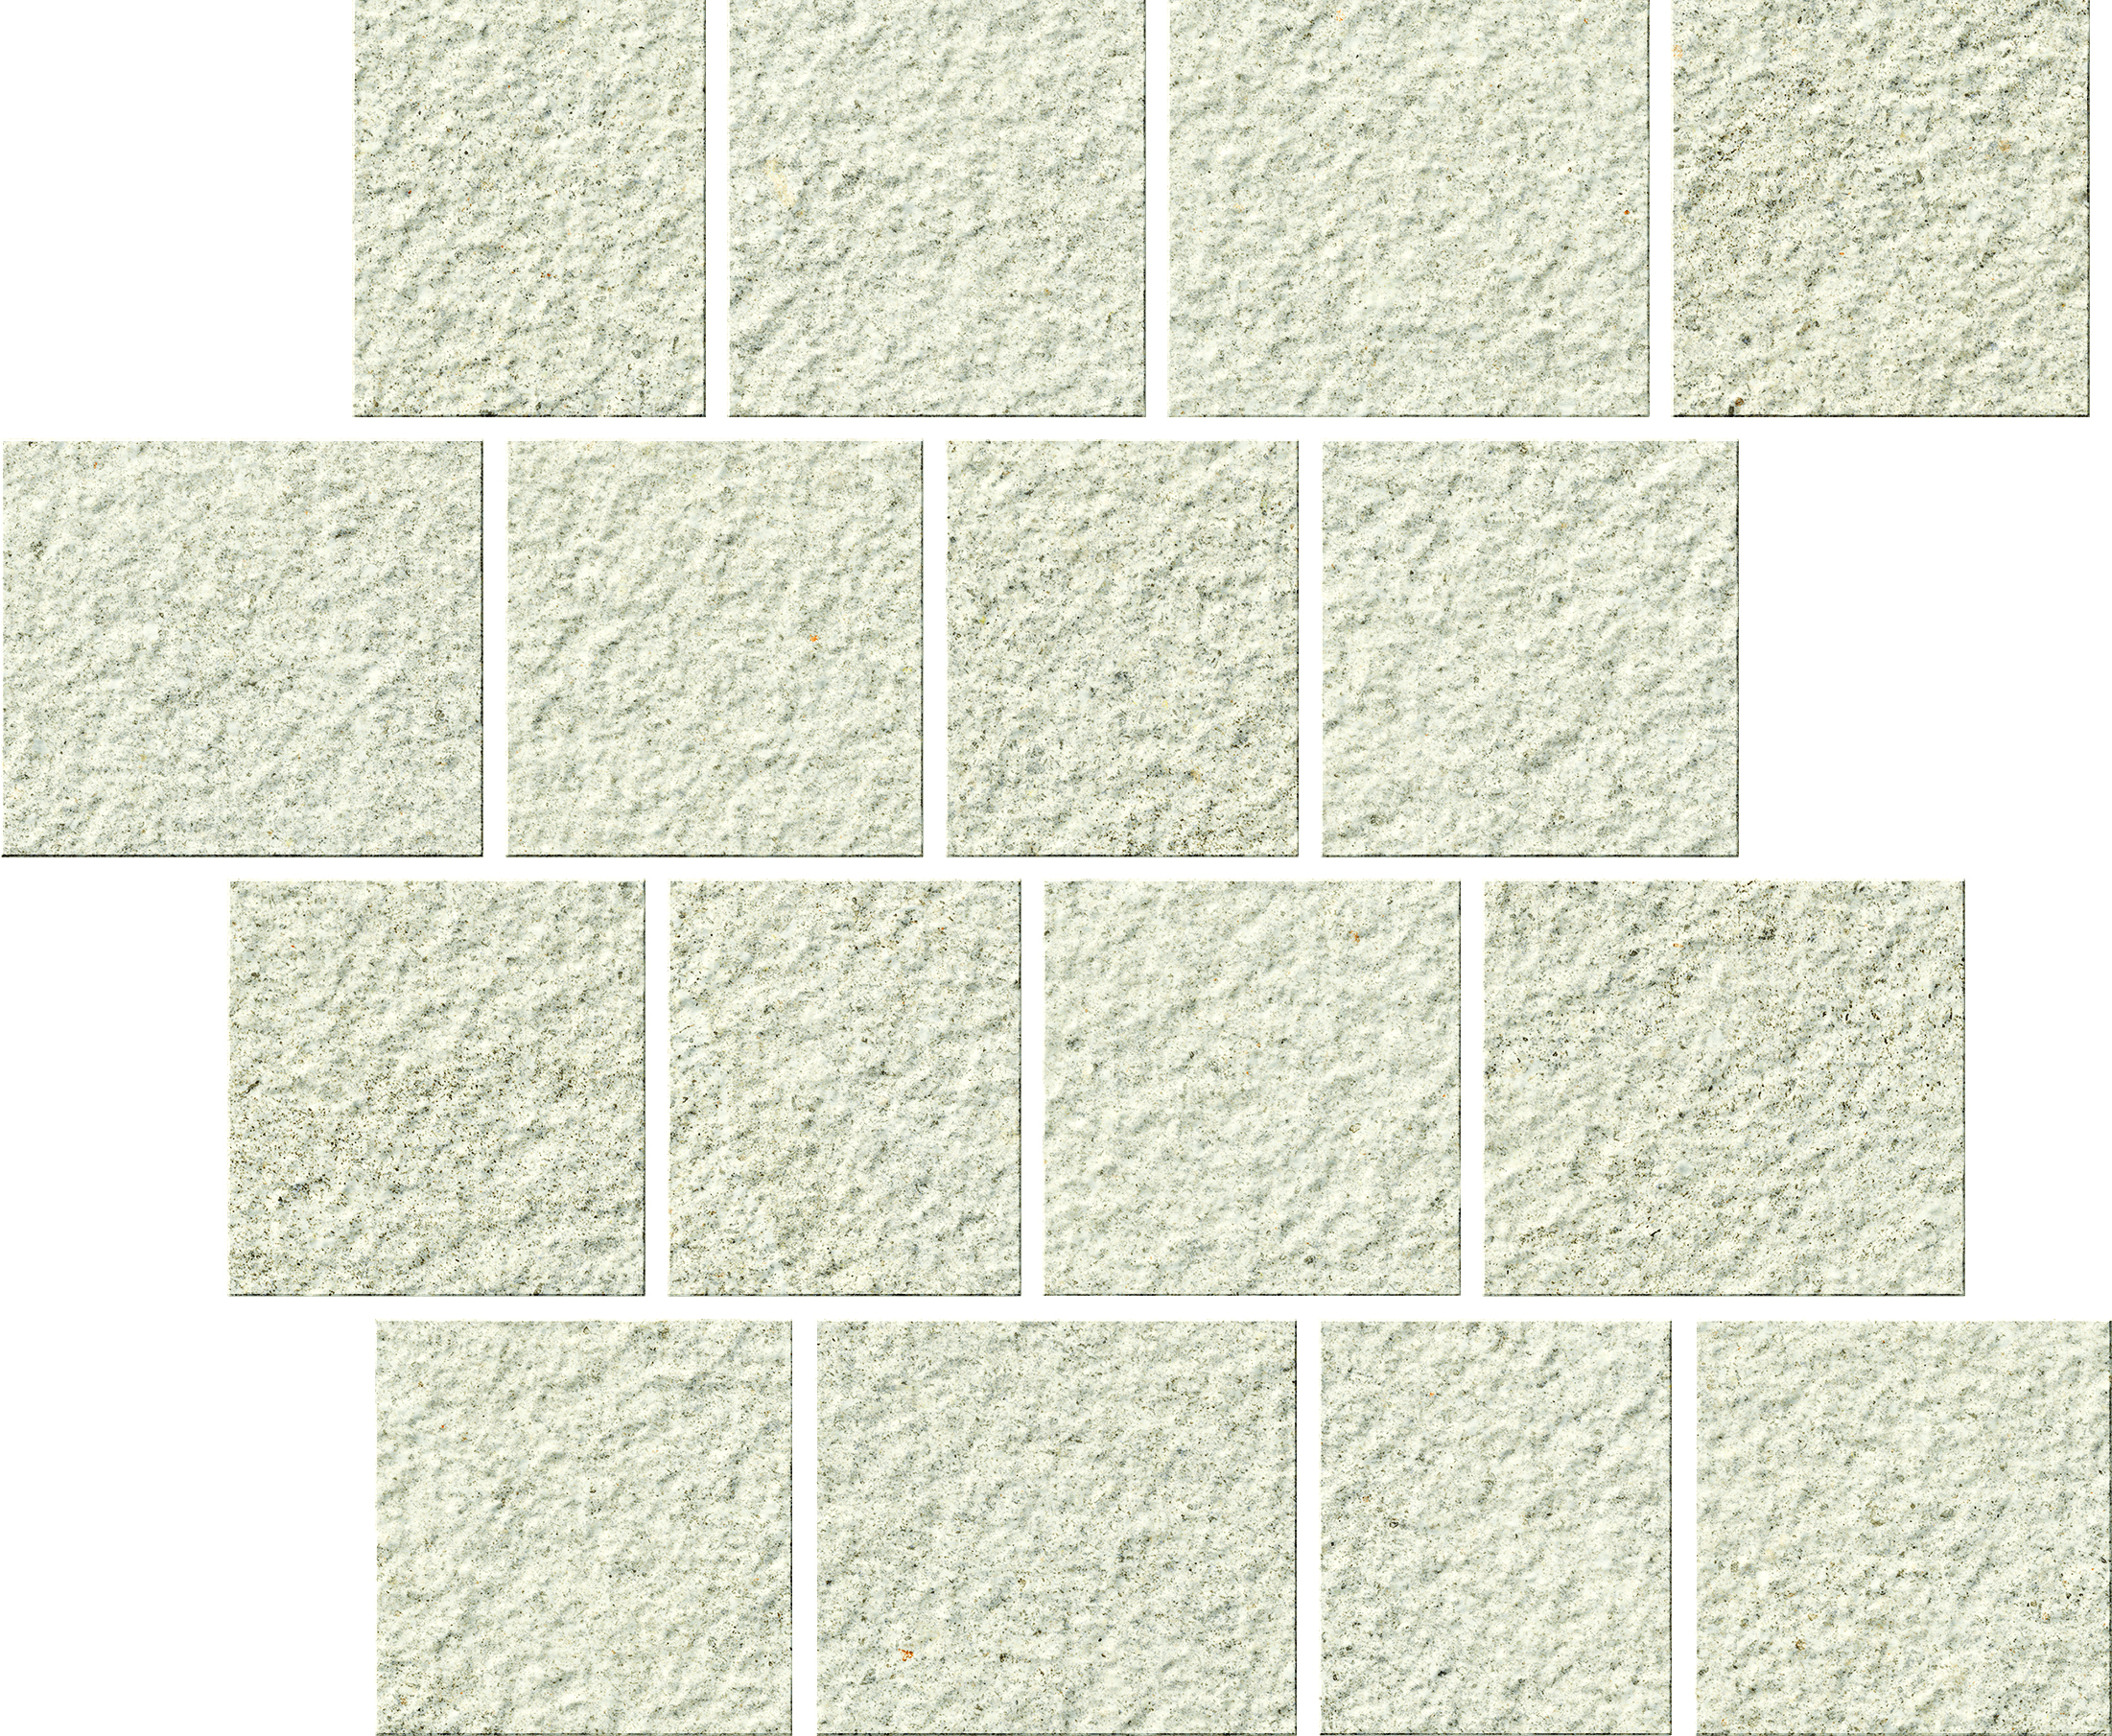 Serenissima Eclettica Bianco Rock Mosaic Pave 1081799 30x30cm rectified 9,5mm